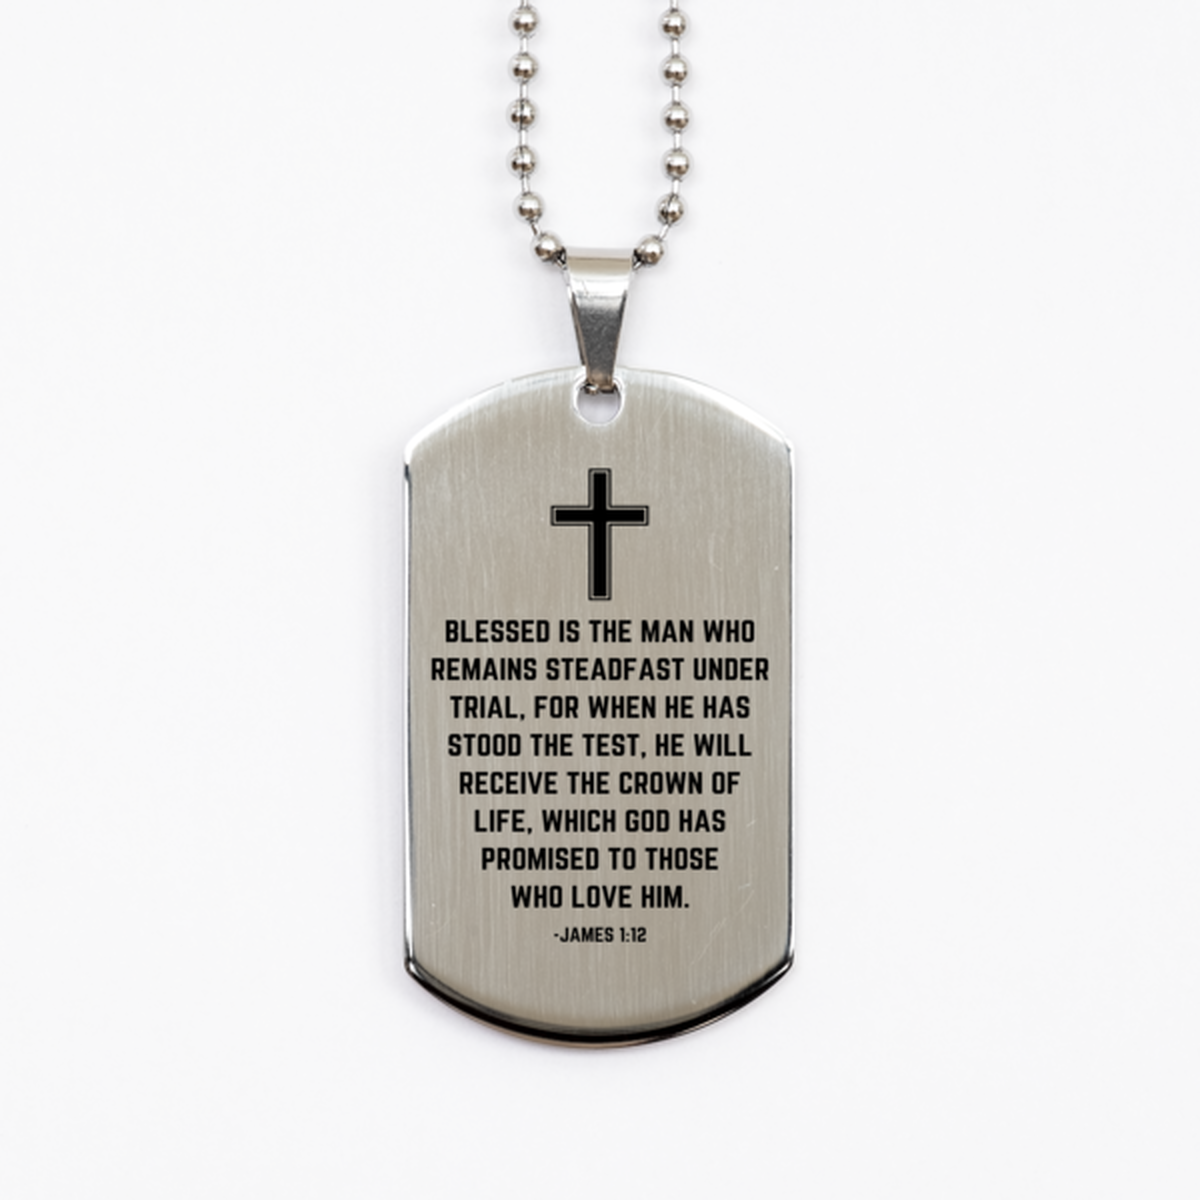 Baptism Gifts For Teenage Boys Girls, Christian Bible Verse Silver Dog Tag, Blessed is the man who remains, Confirmation Gifts, Bible Verse Necklace for Son, Godson, Grandson, Nephew